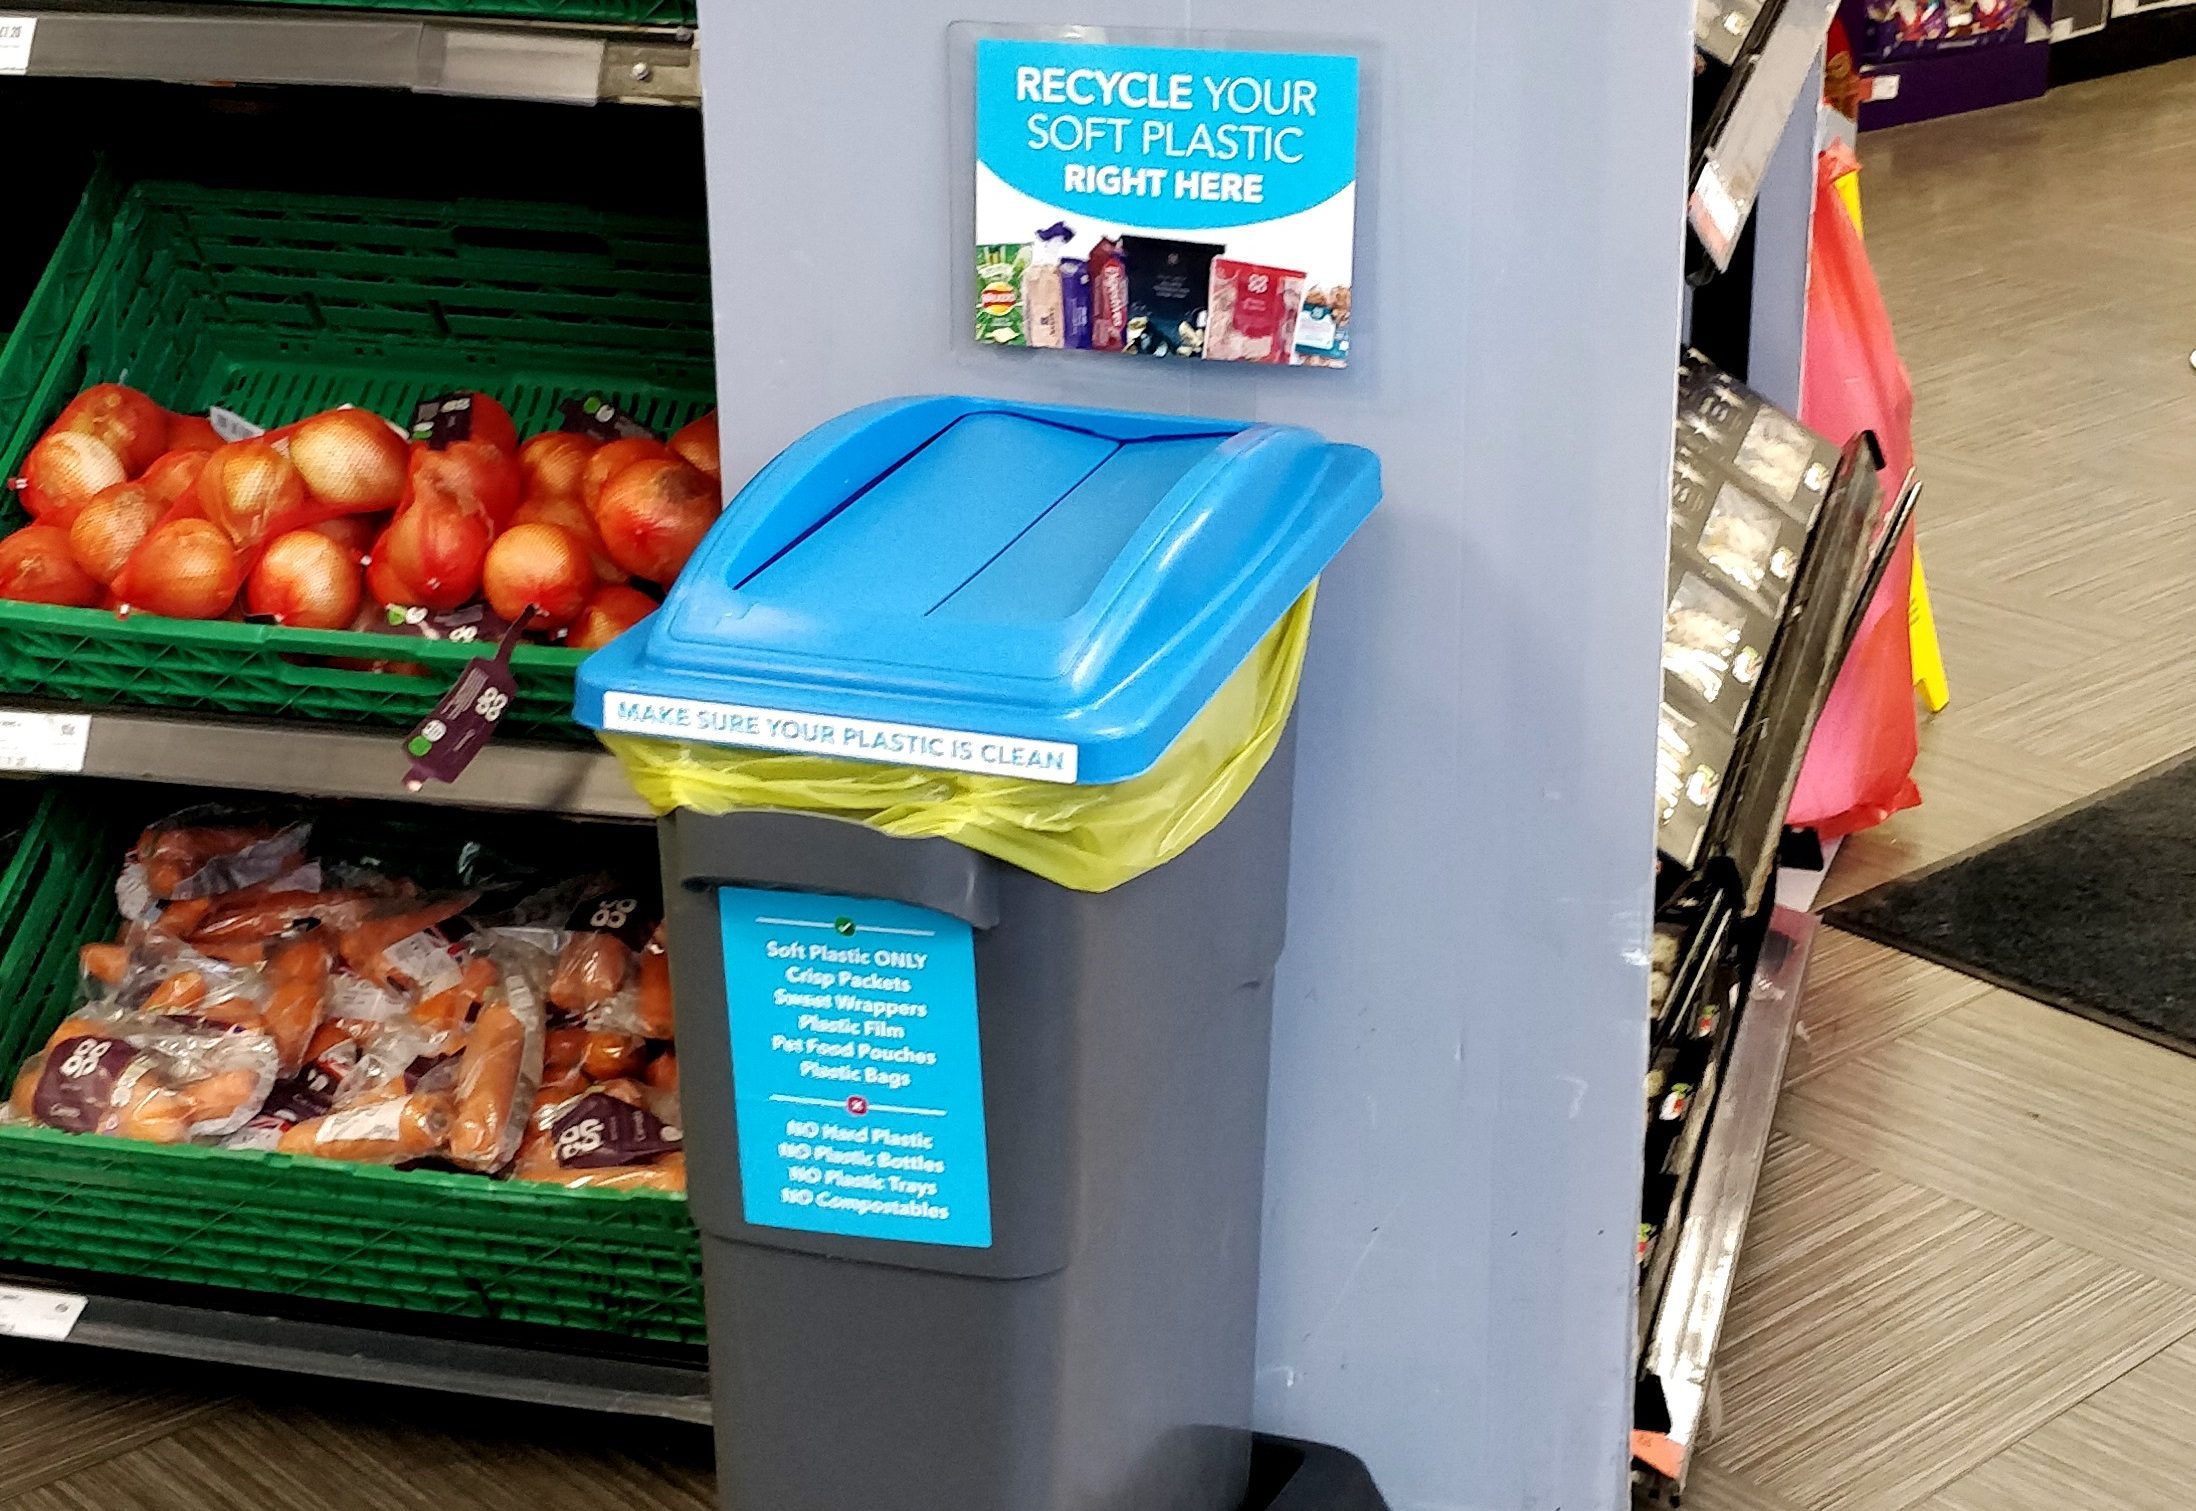 Soft plastic recycling? Binfield and Wokingham Co-ops have it in the bag –